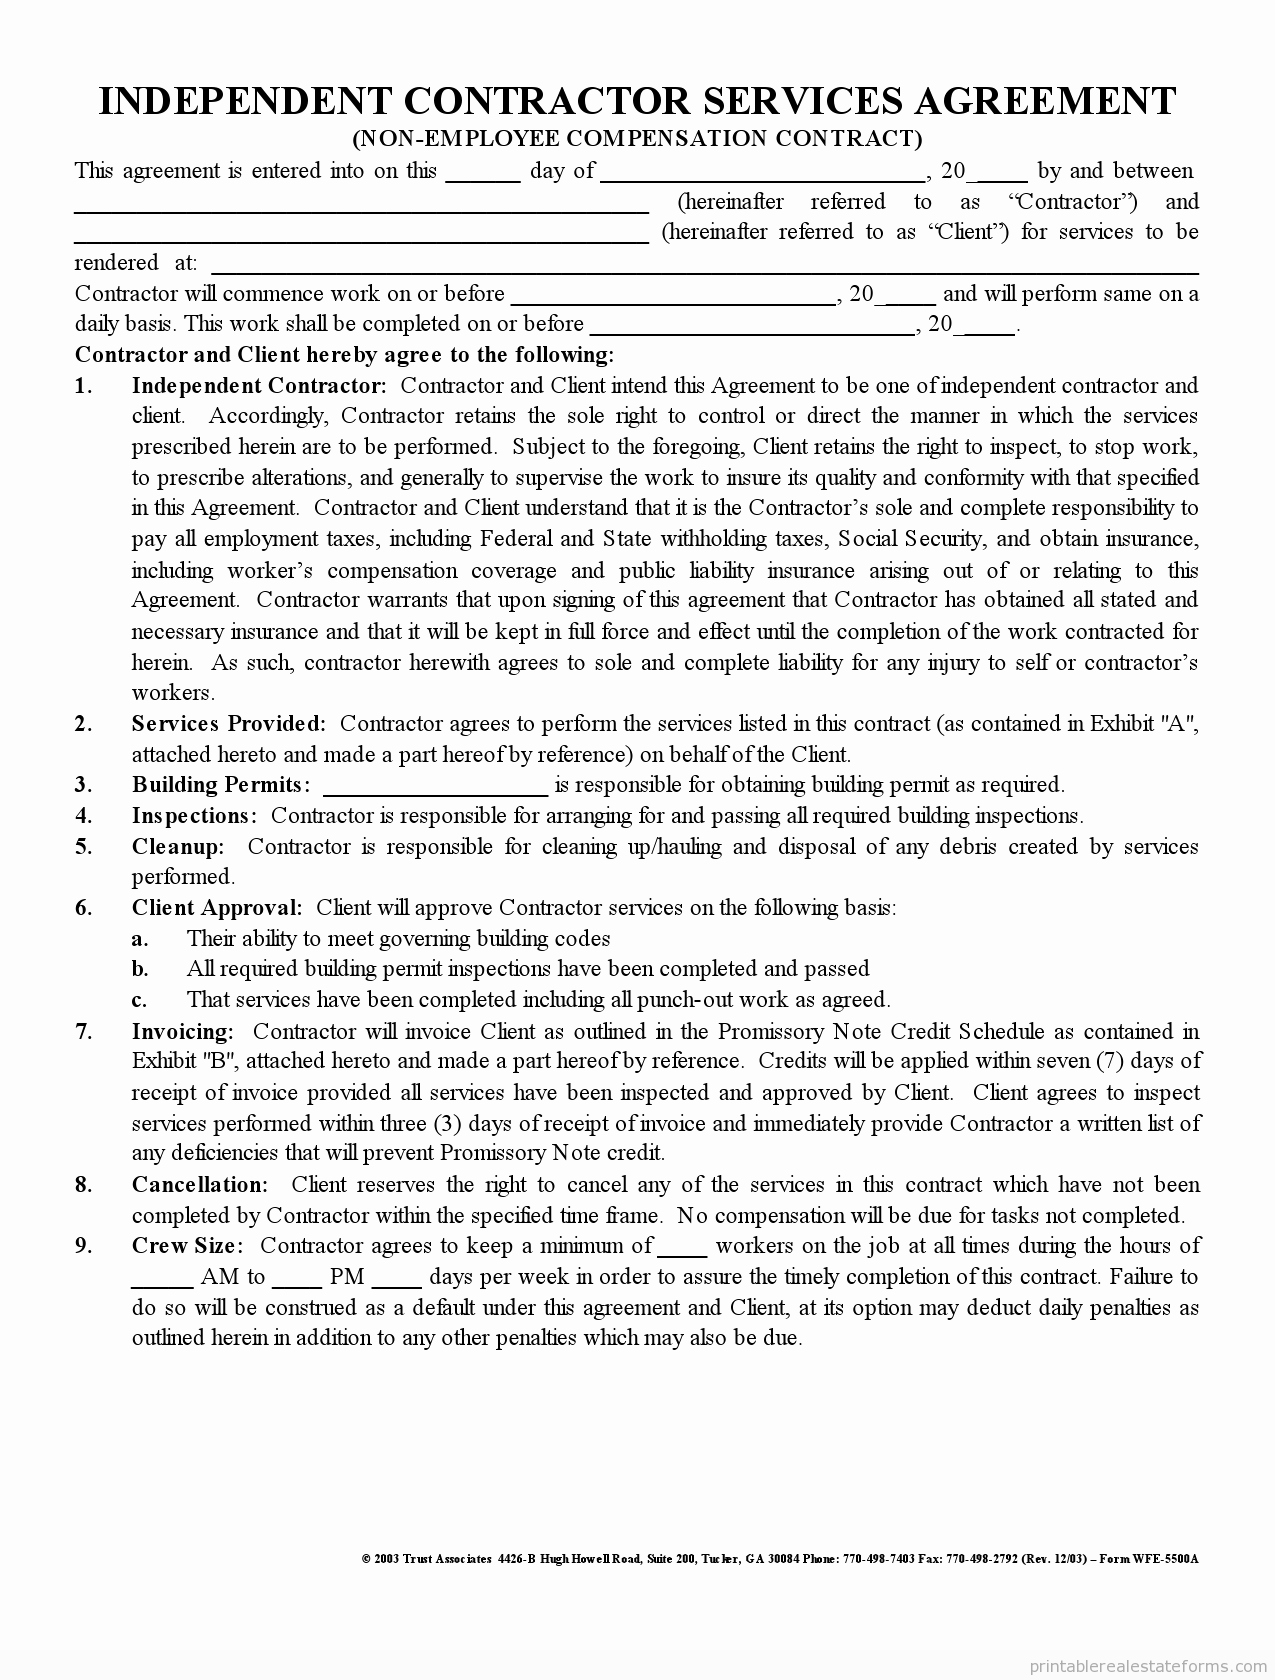 Printable Roofing Contracts Beautiful Free Printable Independent Contractor Agreement form